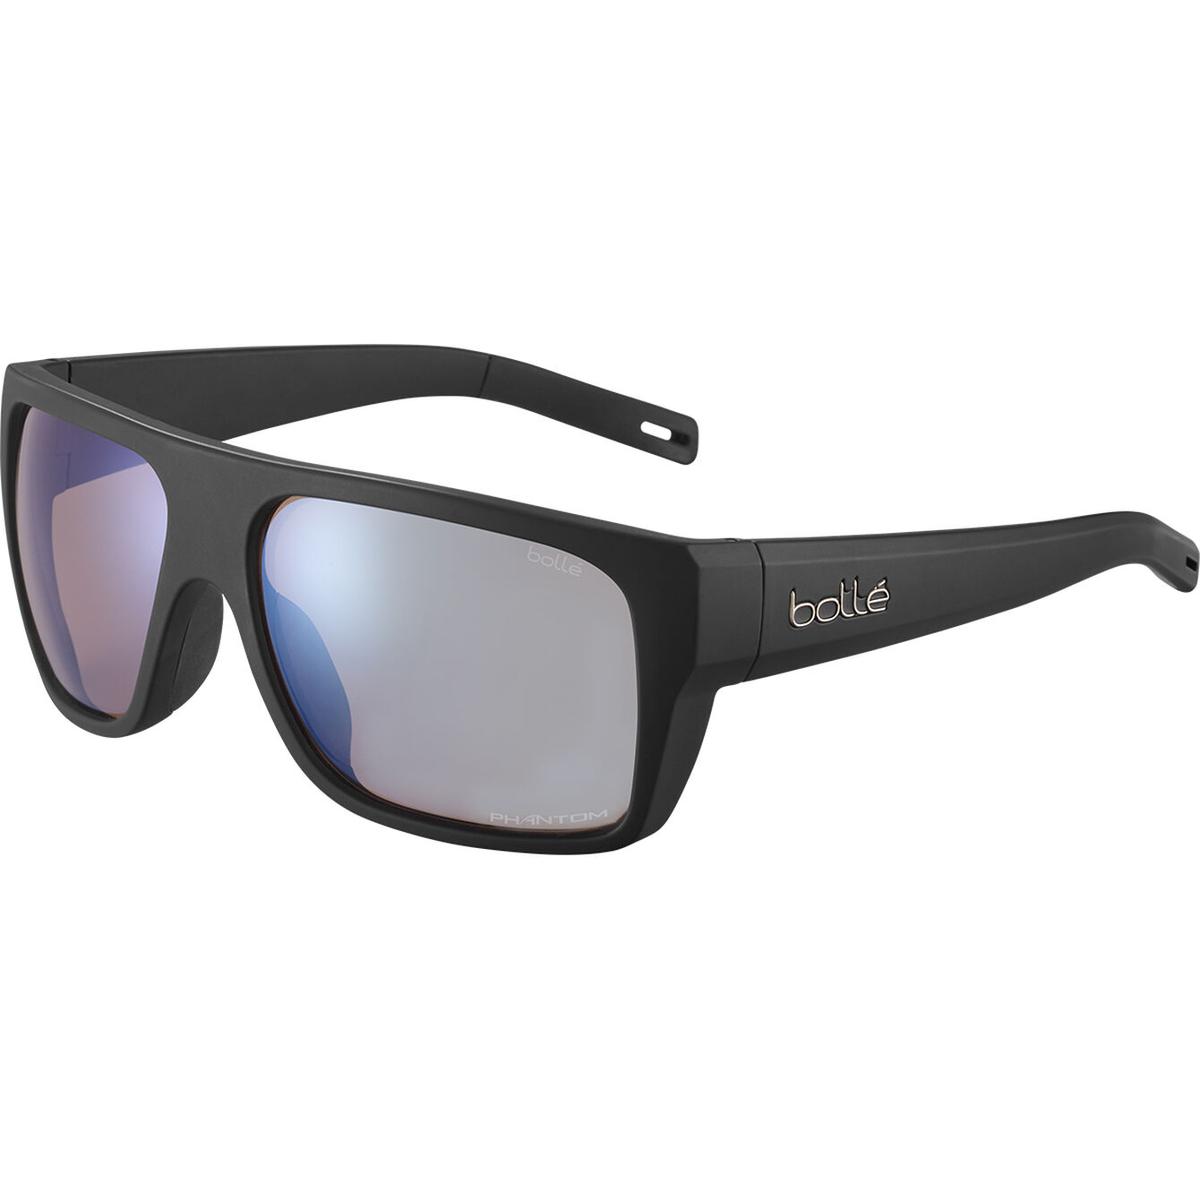 Bolle Swat Tactical Polarized Sunglasses